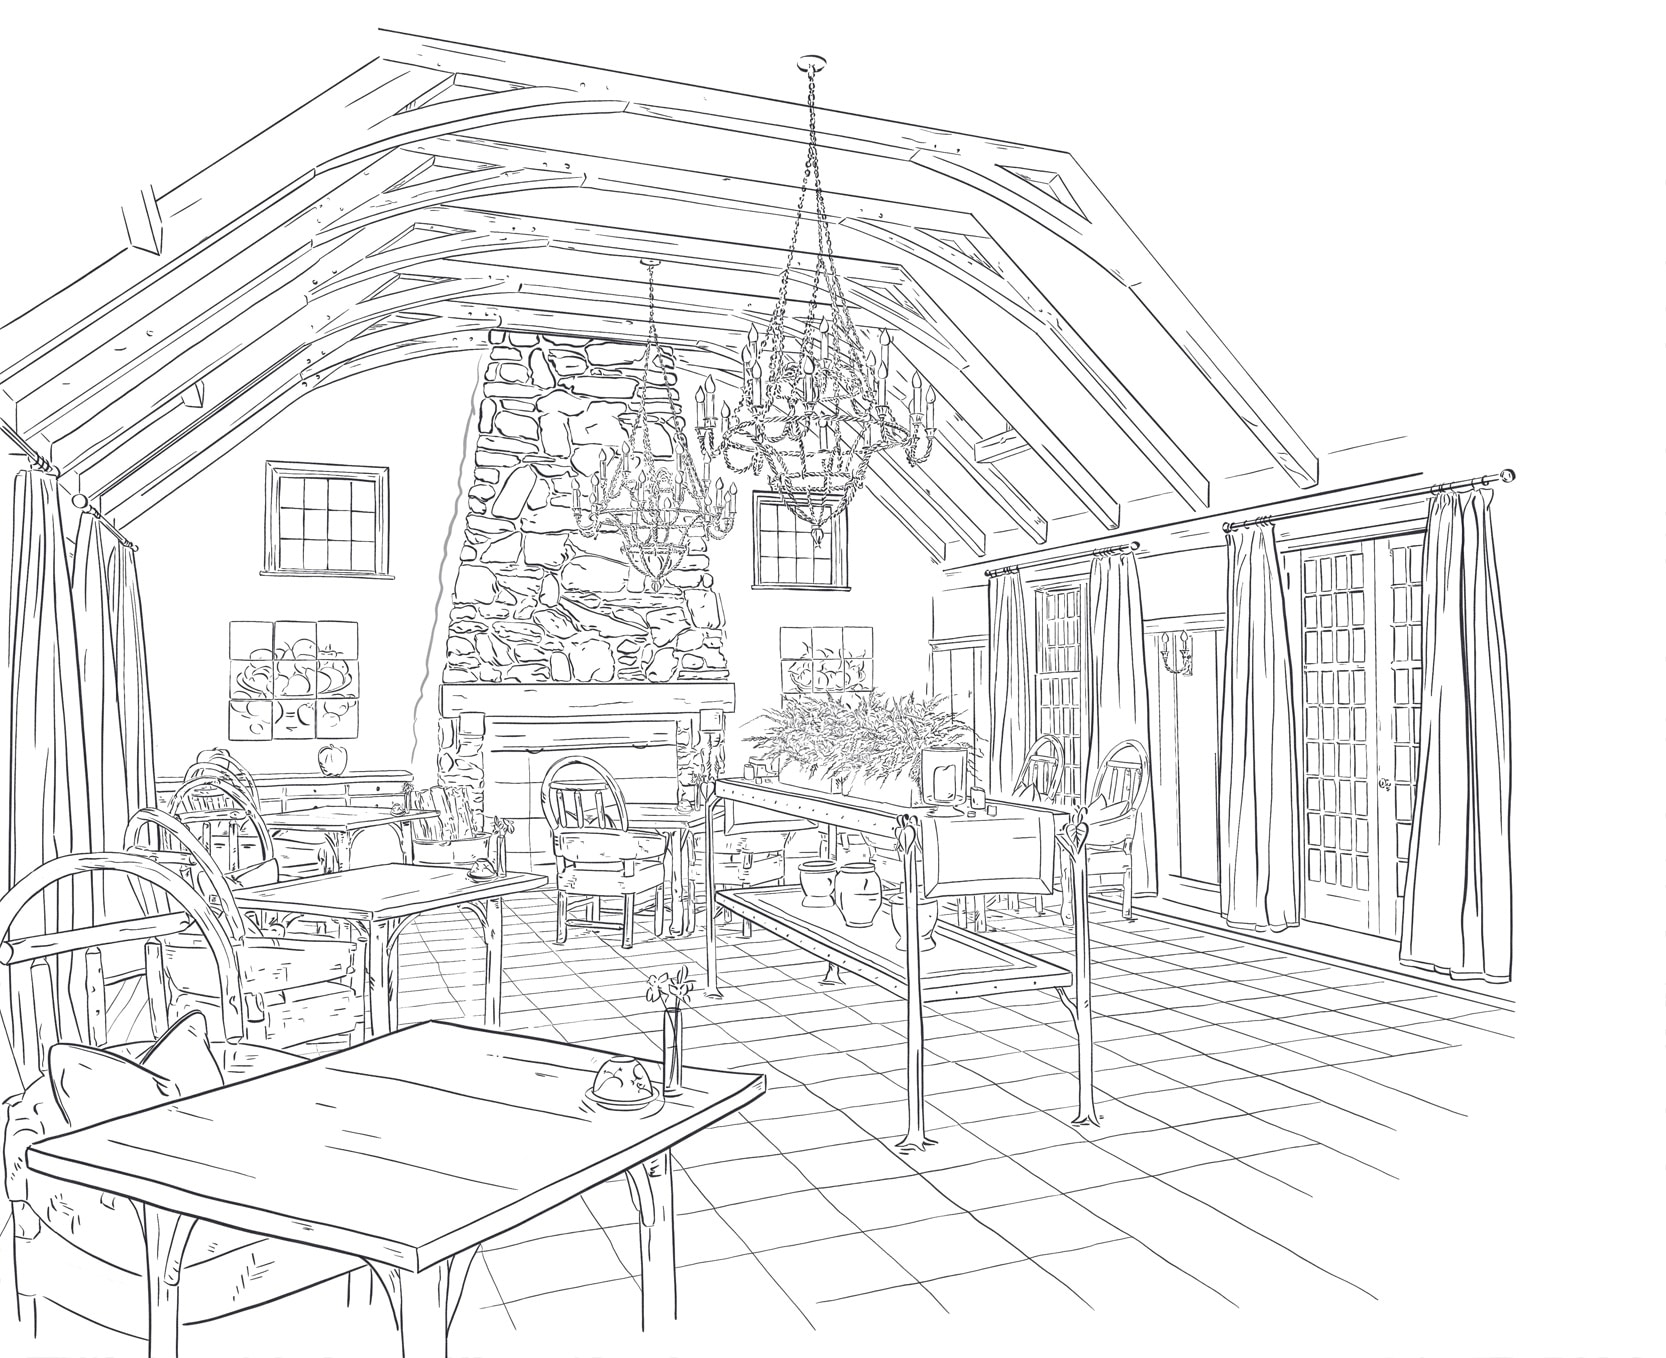 sketch of the inside of a wooden cottage with a fireplace and wooden furniture